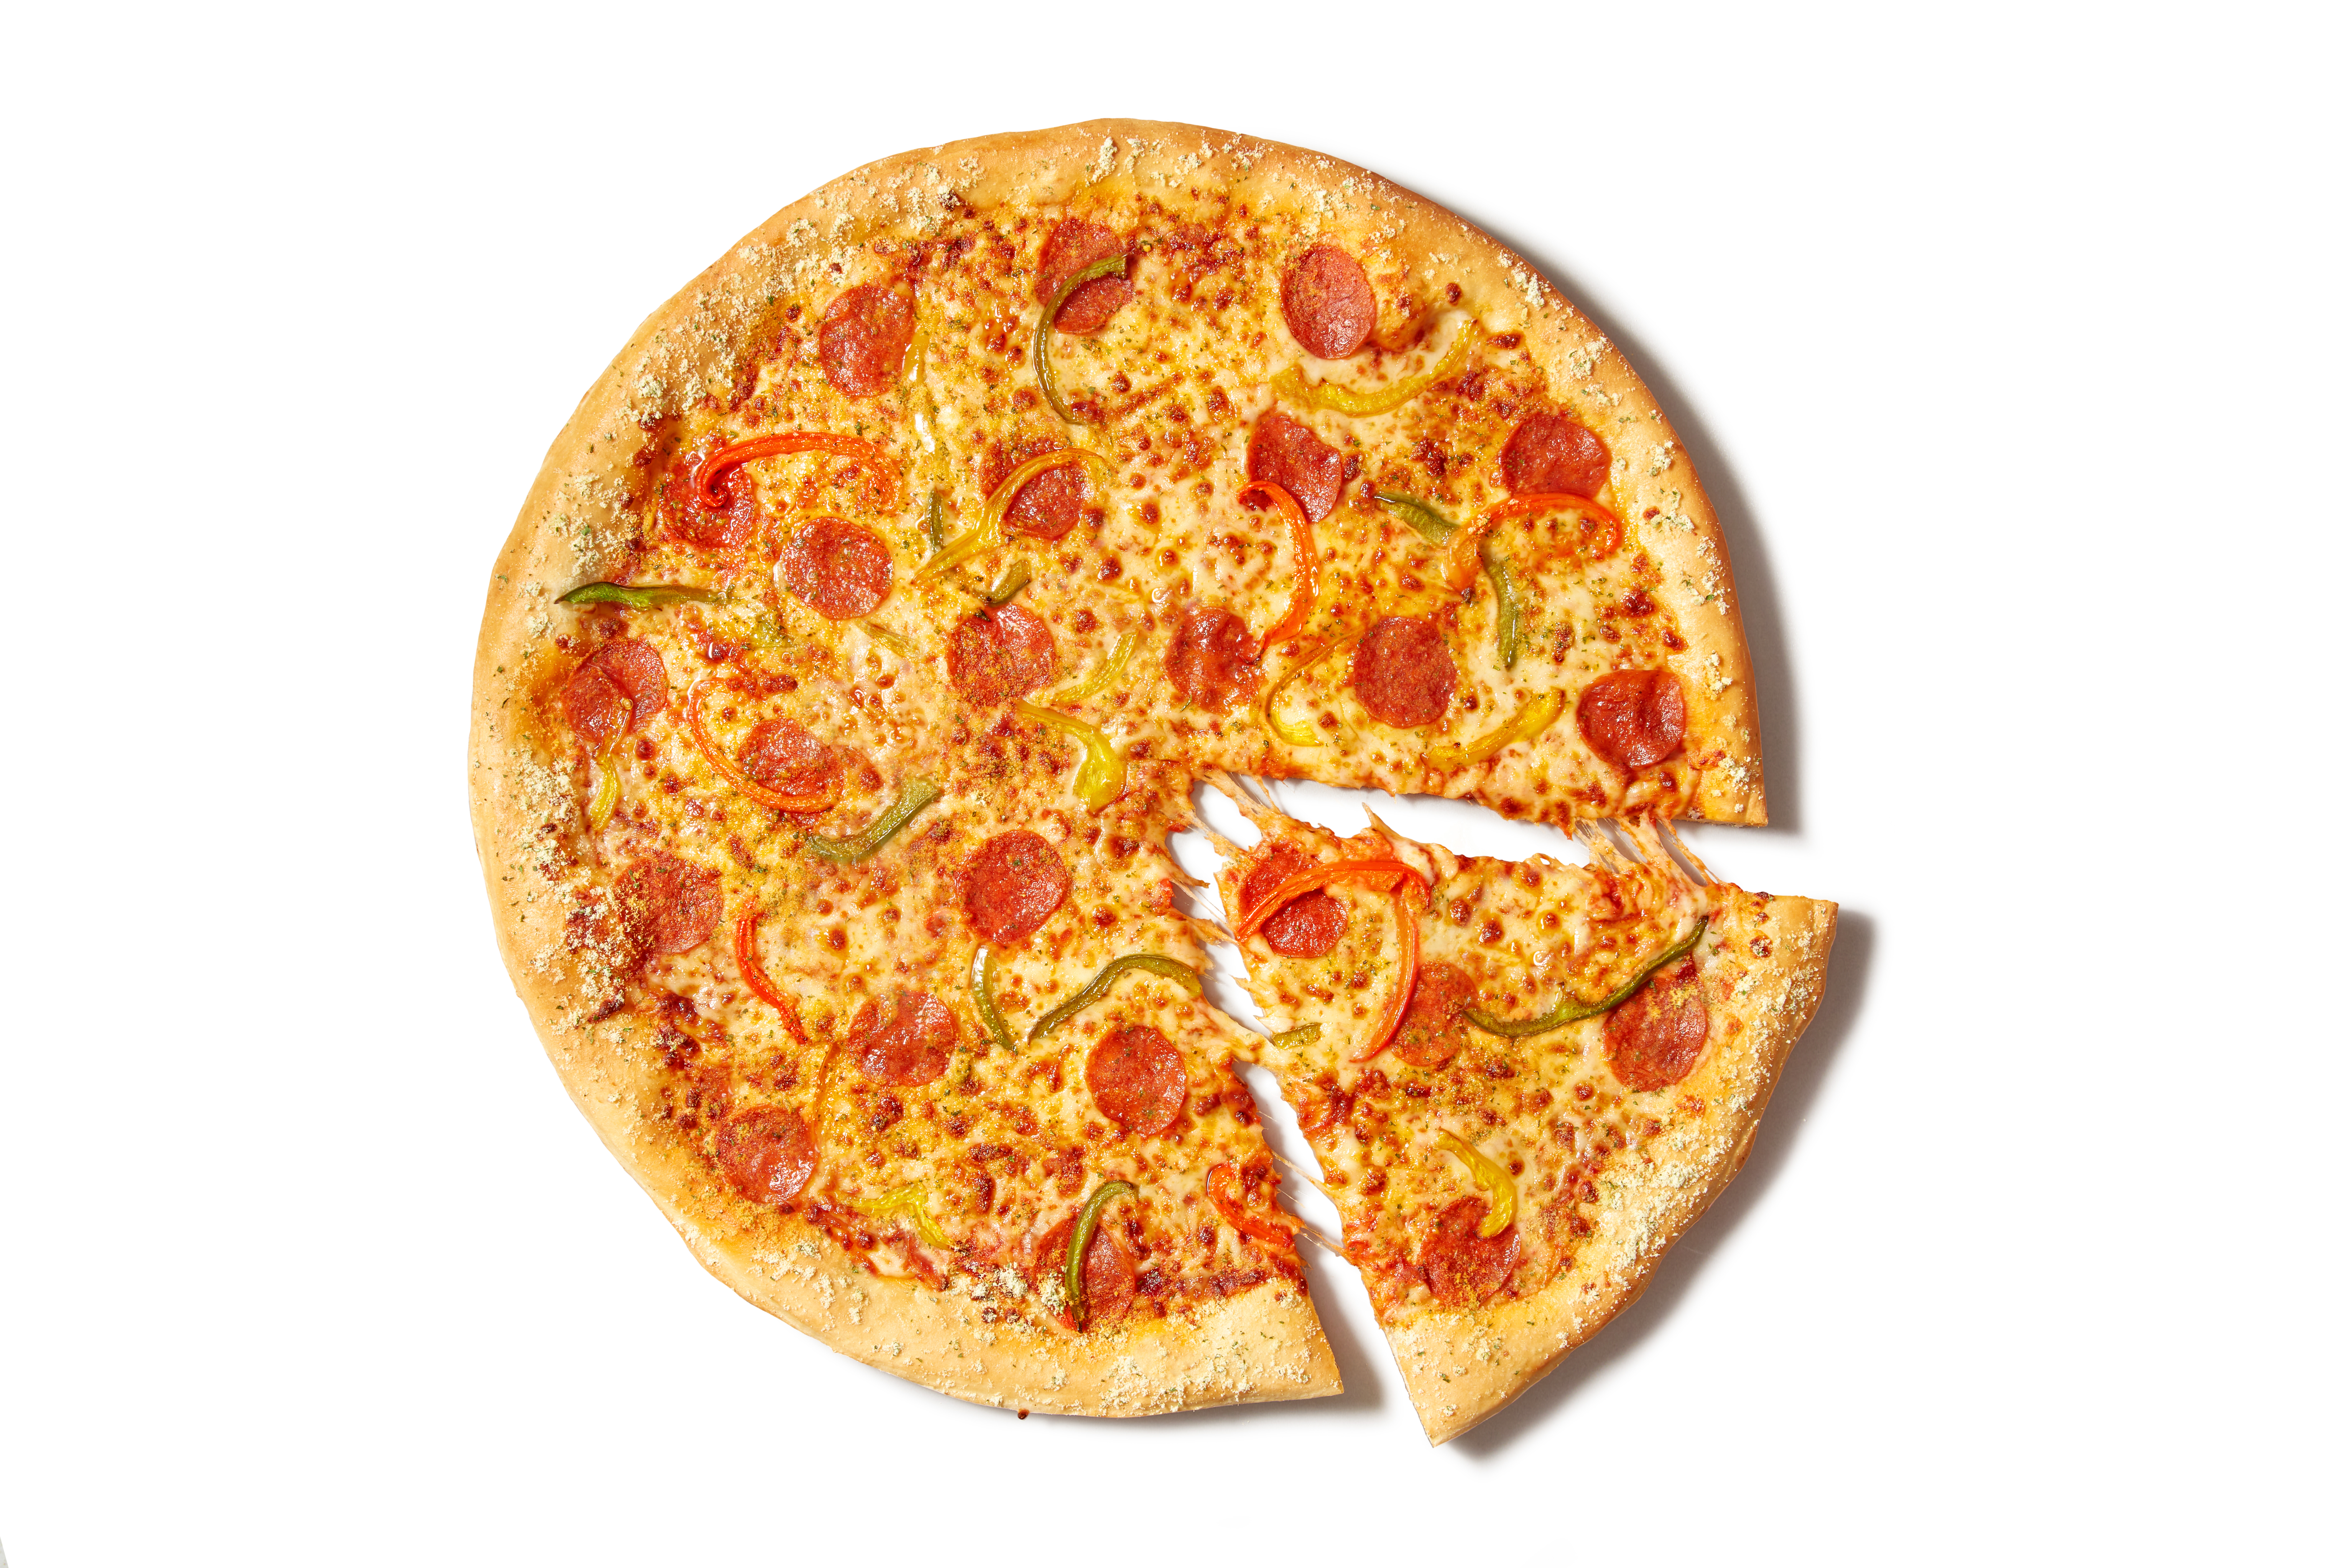 PIZZA HUT® AND BEYOND MEAT® LAUNCH GAME-CHANGING BEYOND PEPPERONI® NATIONWIDE IN THE UK